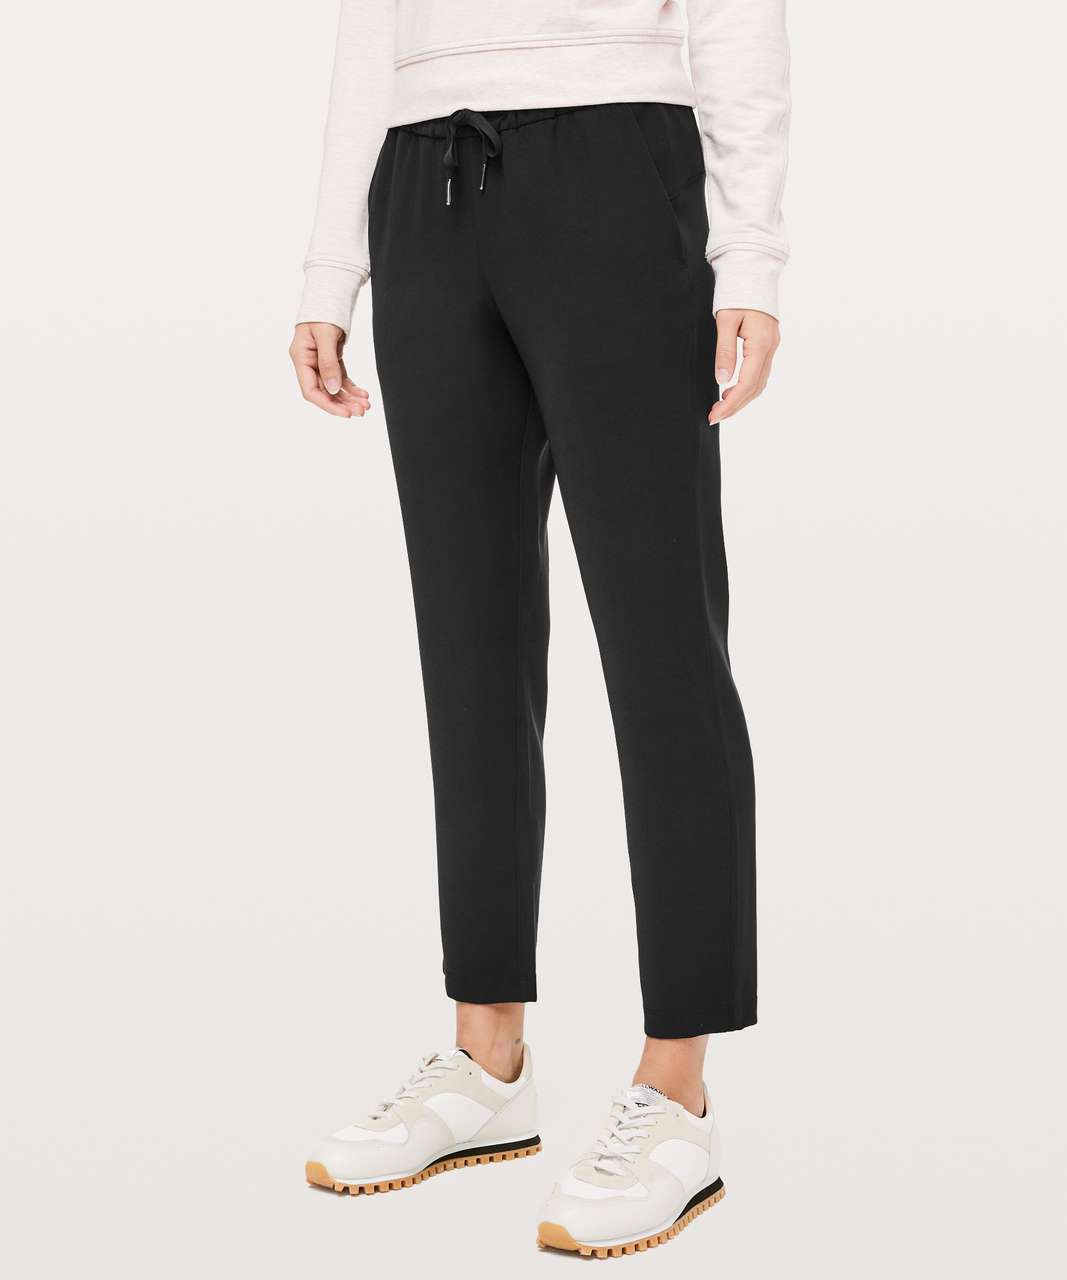 Lululemon On The Fly Pant *Woven 28 